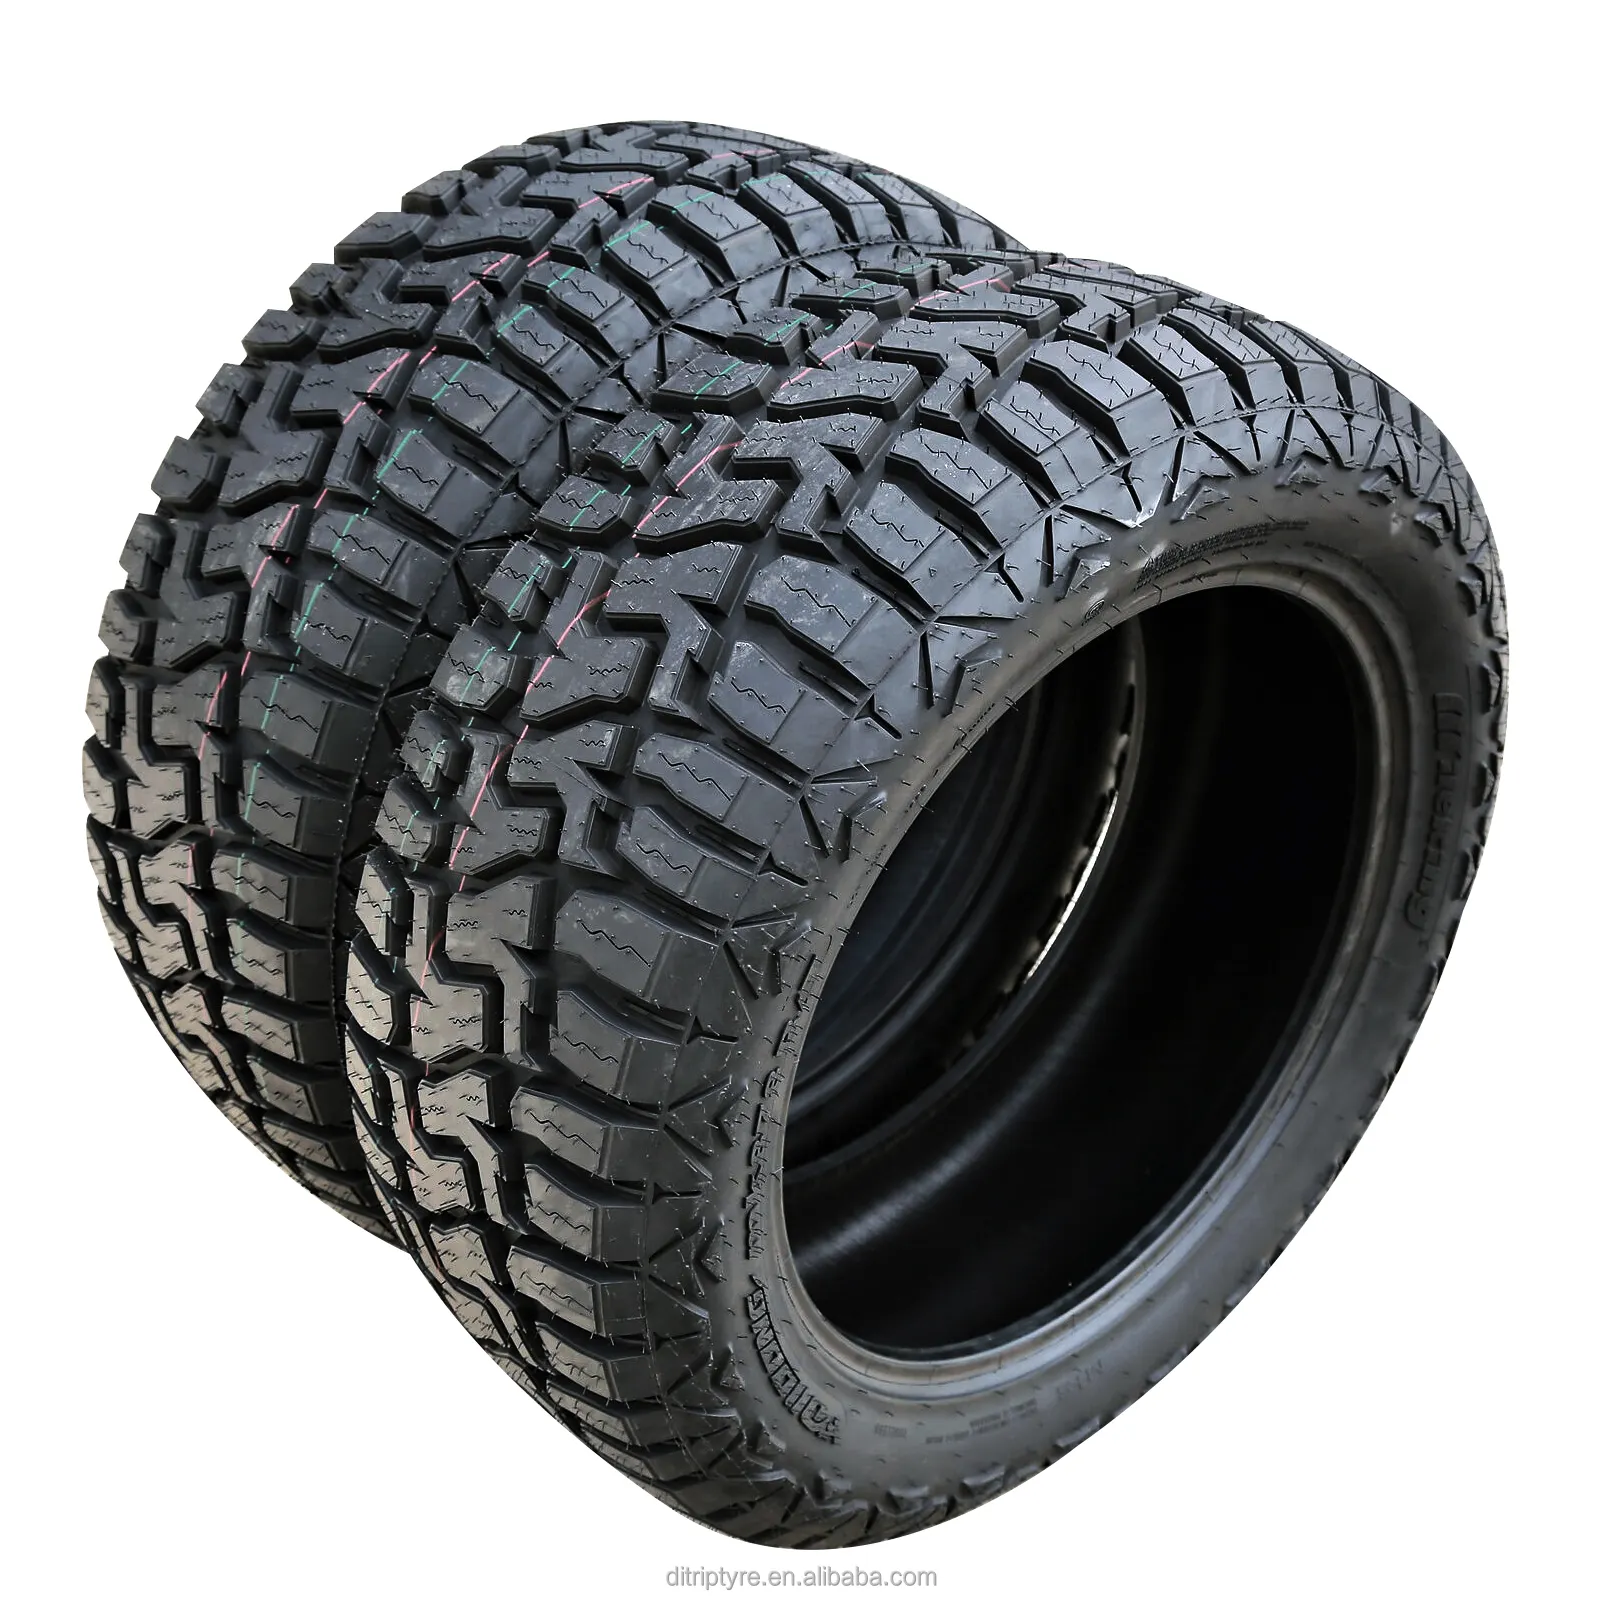 offroad tires 4x4 mud terrain 33 12.50 14.50 R24 light truck LT vehicle tyres for wholesale price list